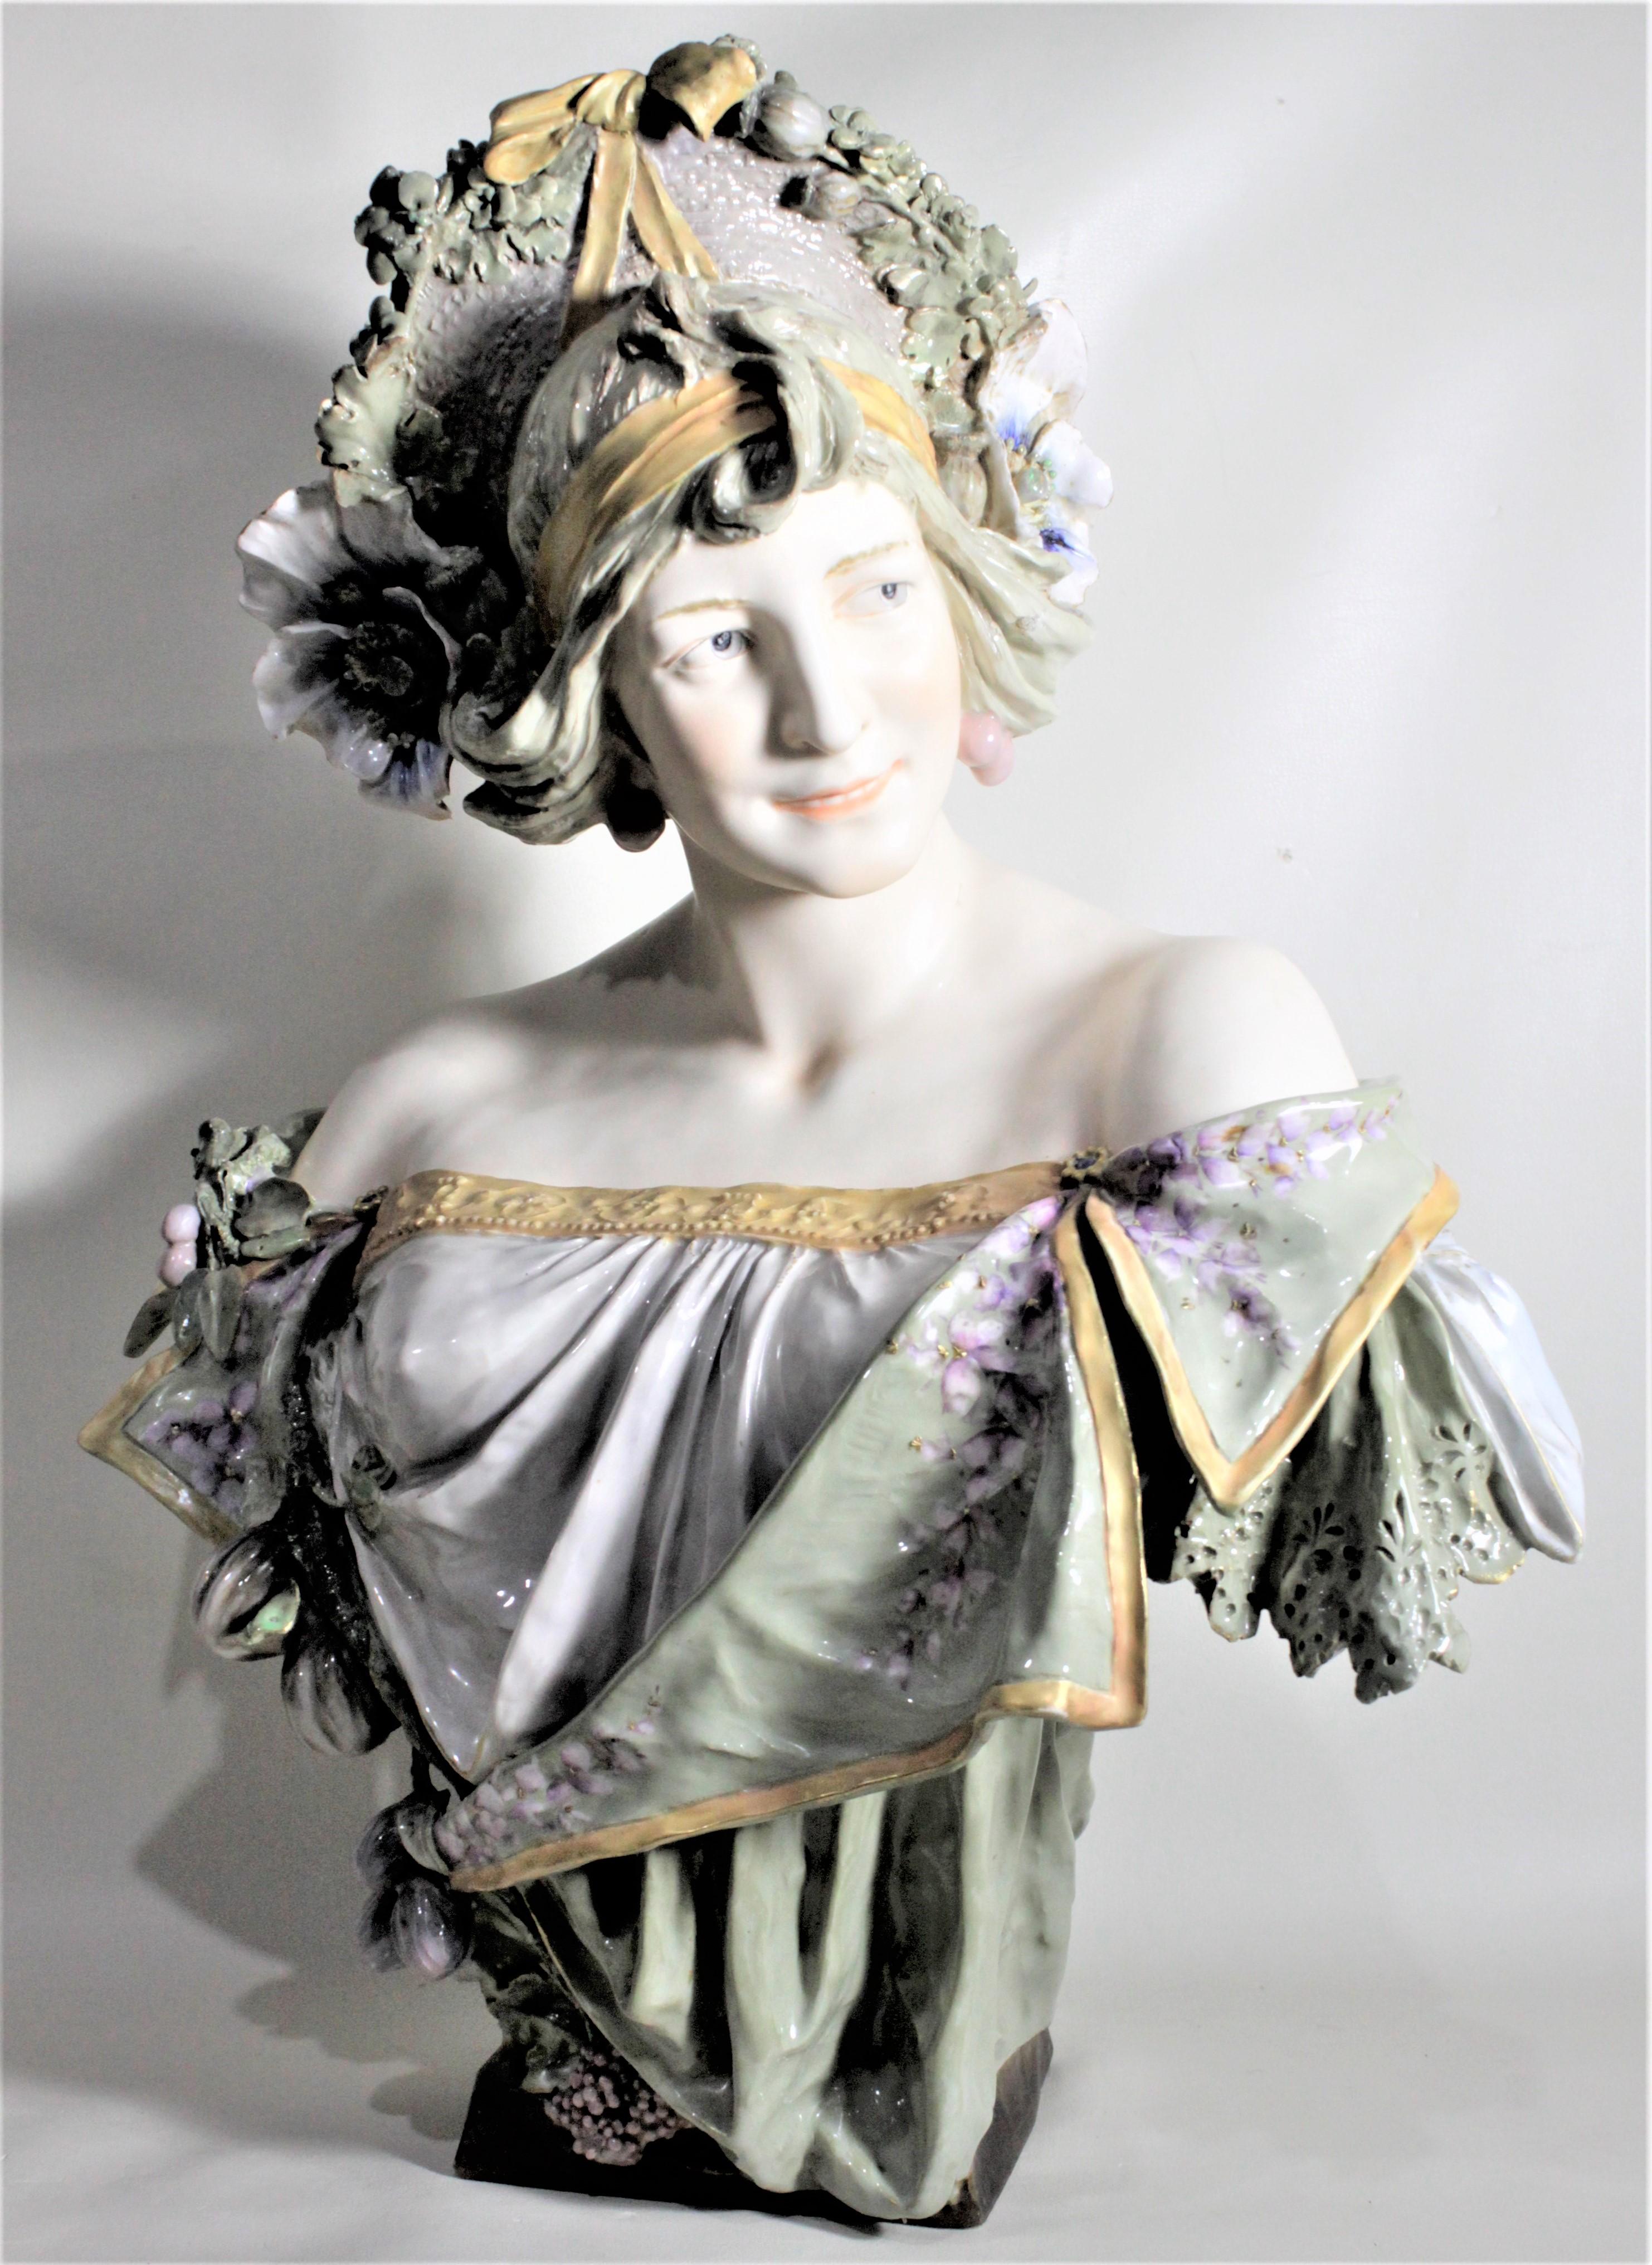 This large and very well executed antique porcelain bust is presumed to have been made in Austria in circa 1890 in the period Art Nouveau style. The bust does have a very faint and illegible signature on the rear of the base, but the artist could